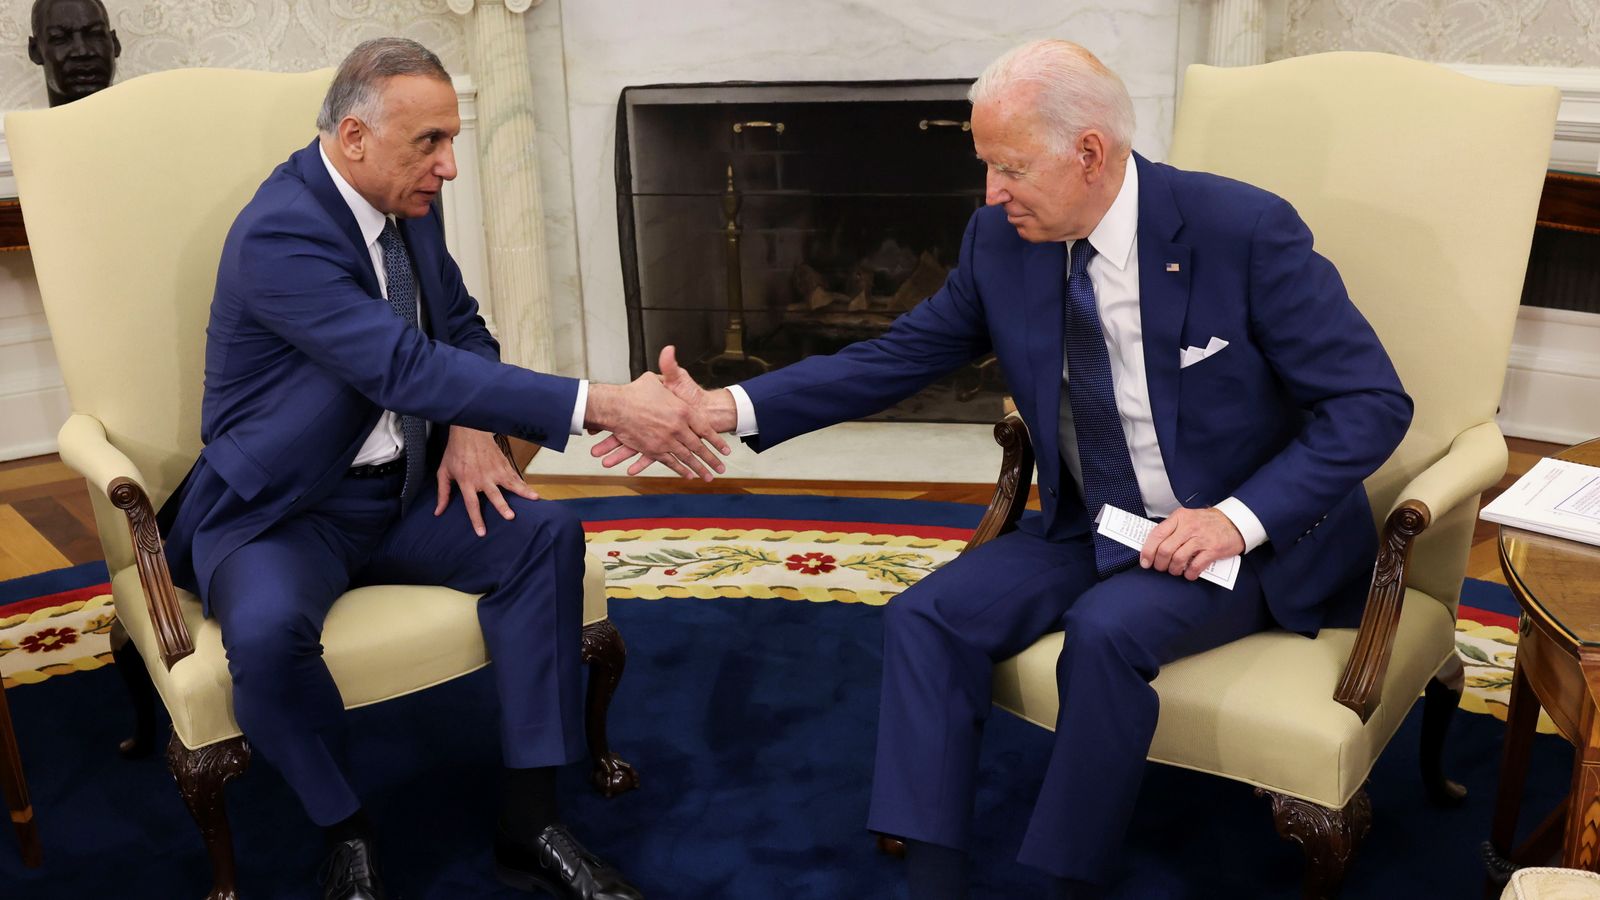 Joe Biden ends US military’s combat mission in Iraq to focus on ‘strengthening’ partnership